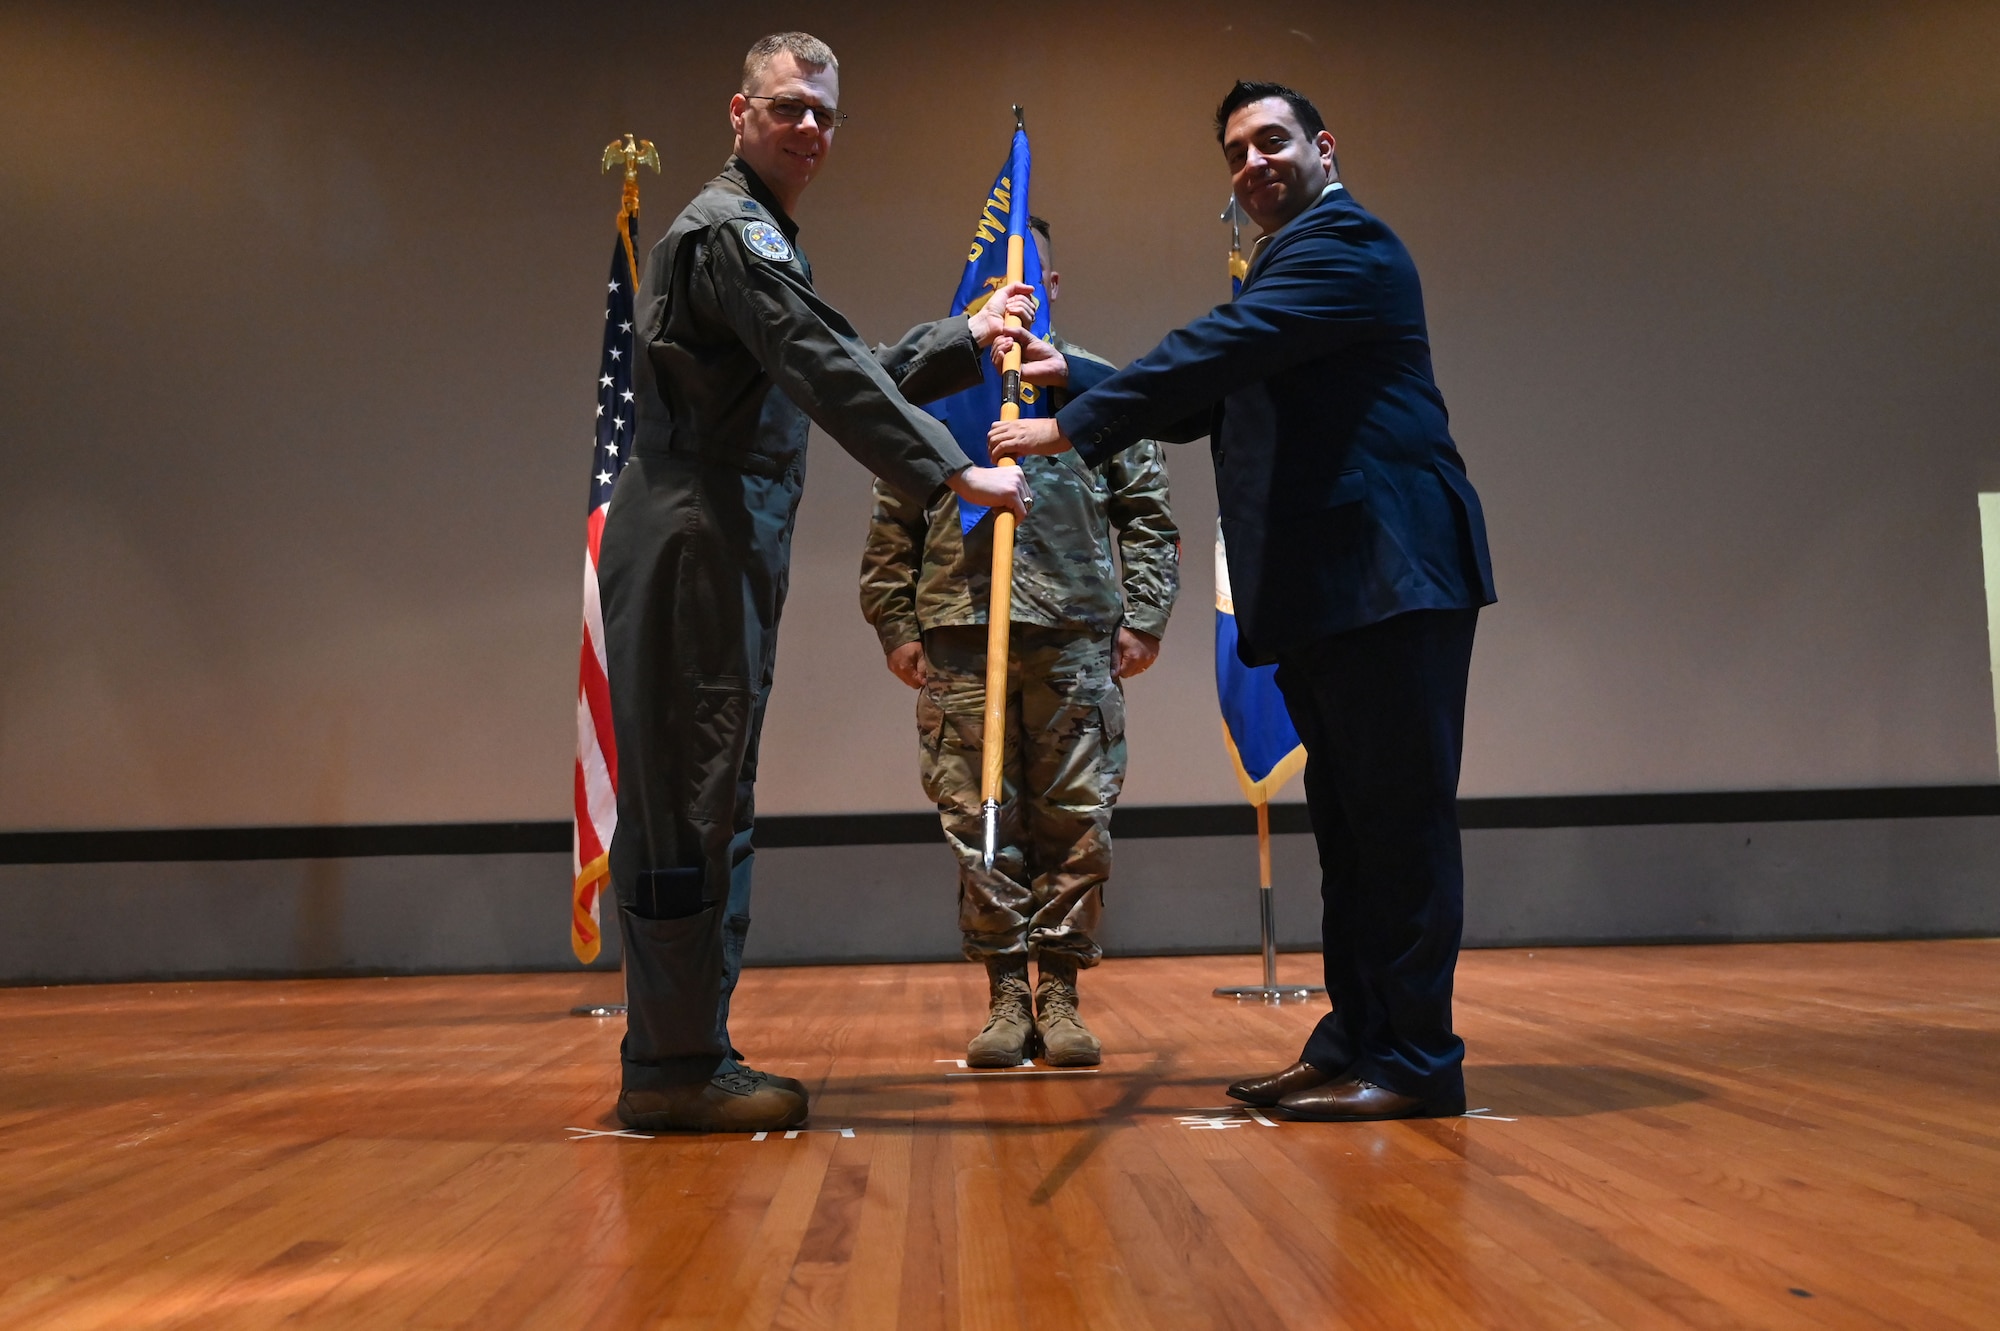 U.S. Air Force Lt. Col. Matthew Munska, 850th Spectrum Warfare Group deputy commander, inducts Matthew Pace, Senior Director of Enterprise It and Security at Merlyn Mind and serves on the Destin Military Affairs Committee, during the wing’s first Honorary Commander Induction ceremony, at Eglin Air Force Base, Fla., Dec. 1, 2023. Honorary Commanders serve as the liaison between the 350th Spectrum Warfare Wing and the surrounding community by maintaining strong relations through mutually beneficial professional partnership. (U.S. Air Force photo by Staff Sgt. Ericka A. Woolever)